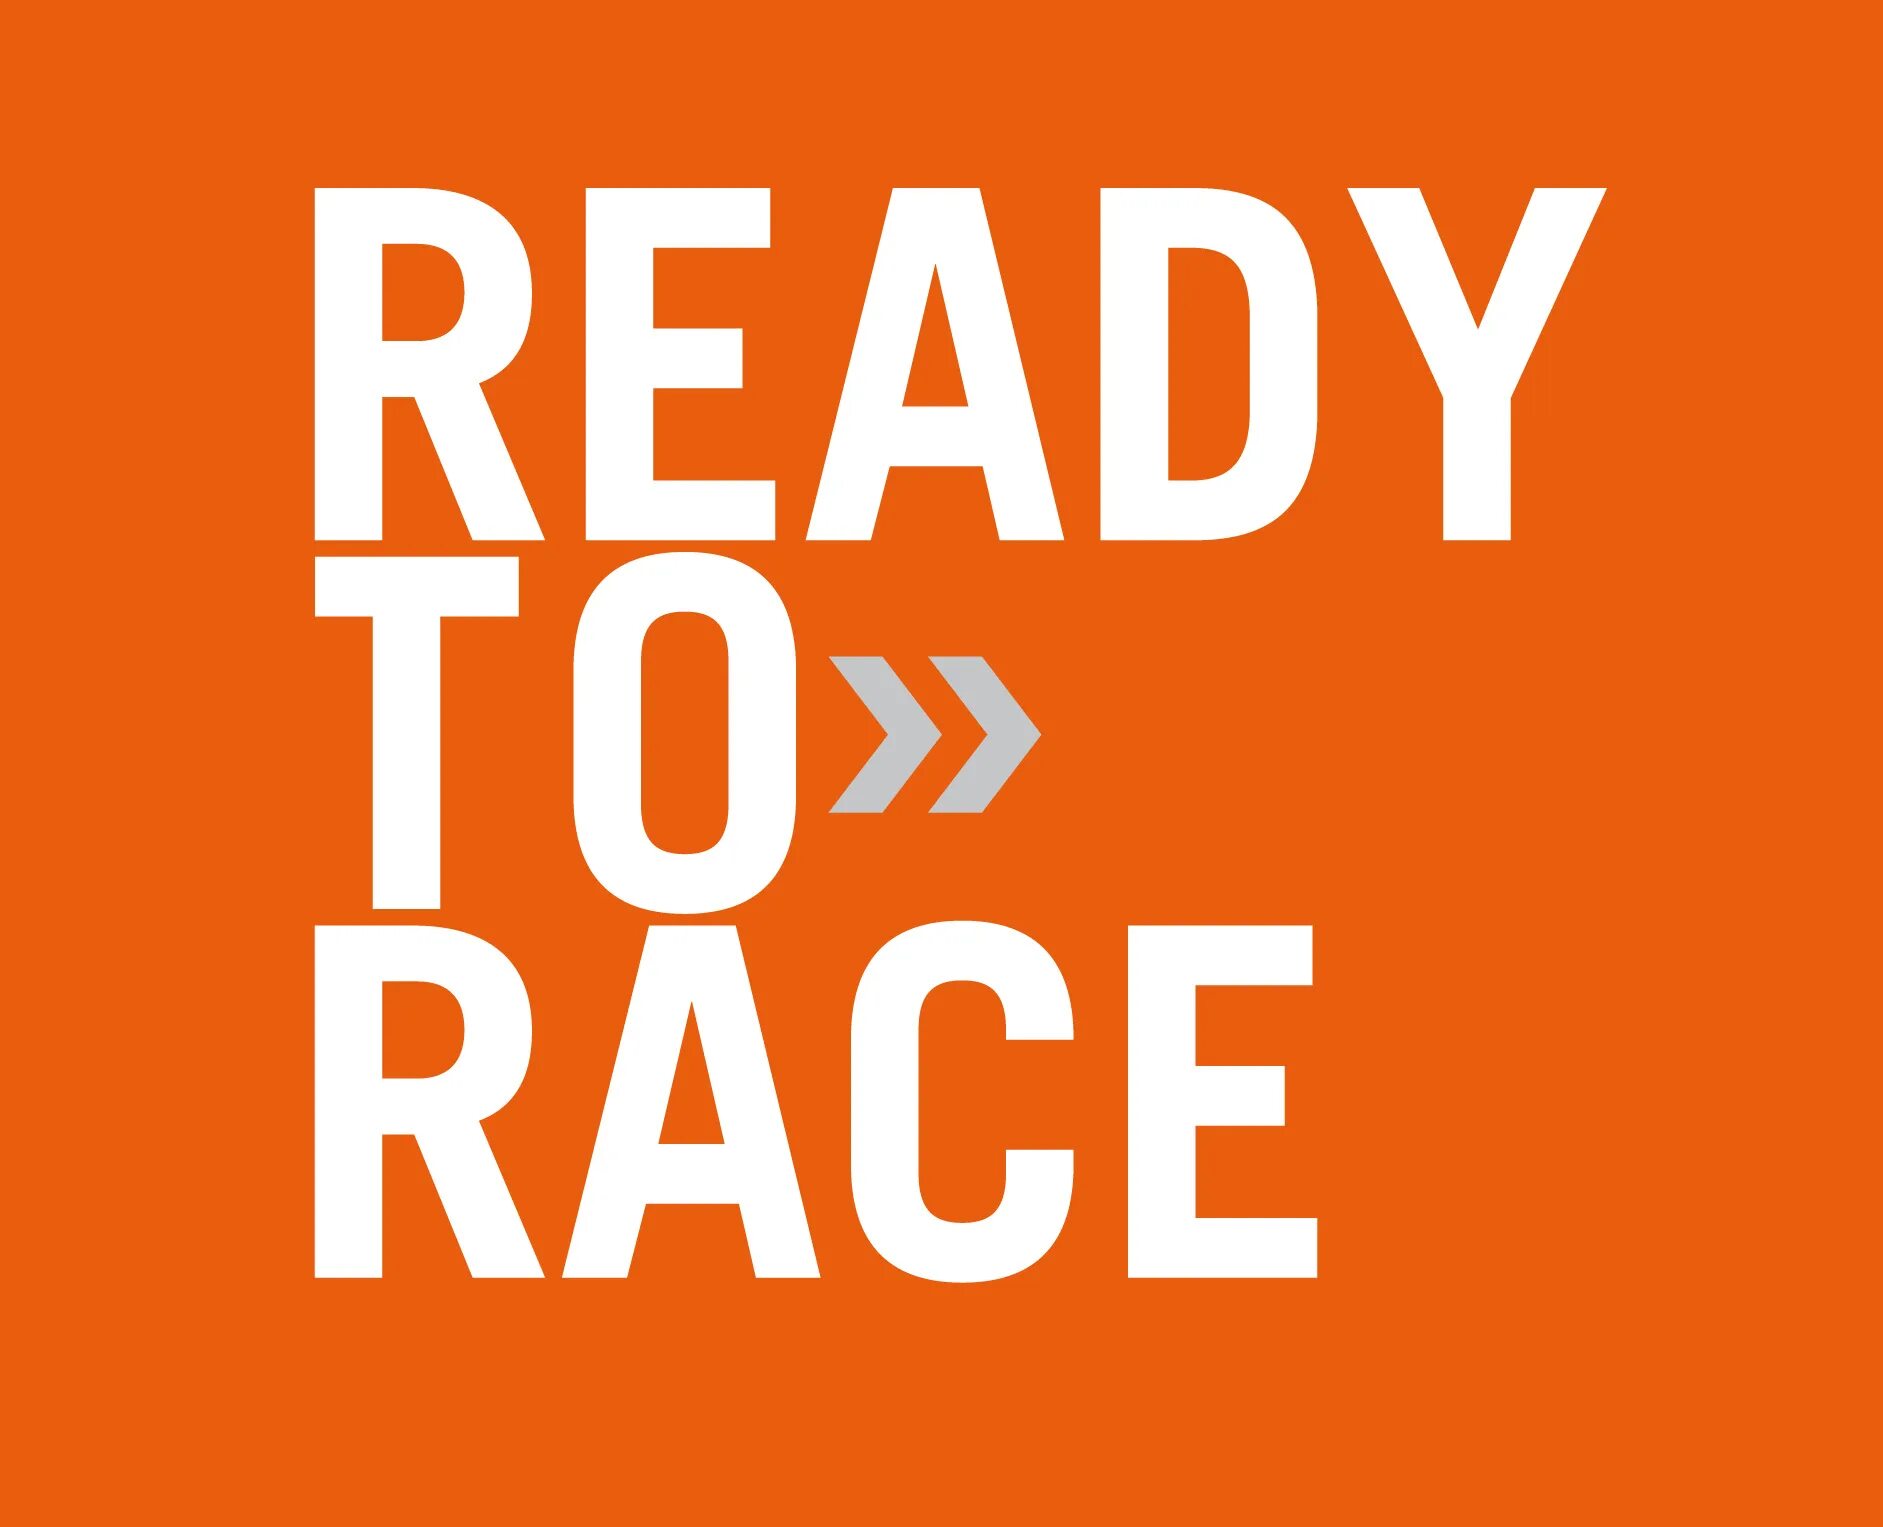 КТМ ready to Race. Ready to Race наклейка. KTM ready to Race logo. Ready to Race лого. Ready to receive